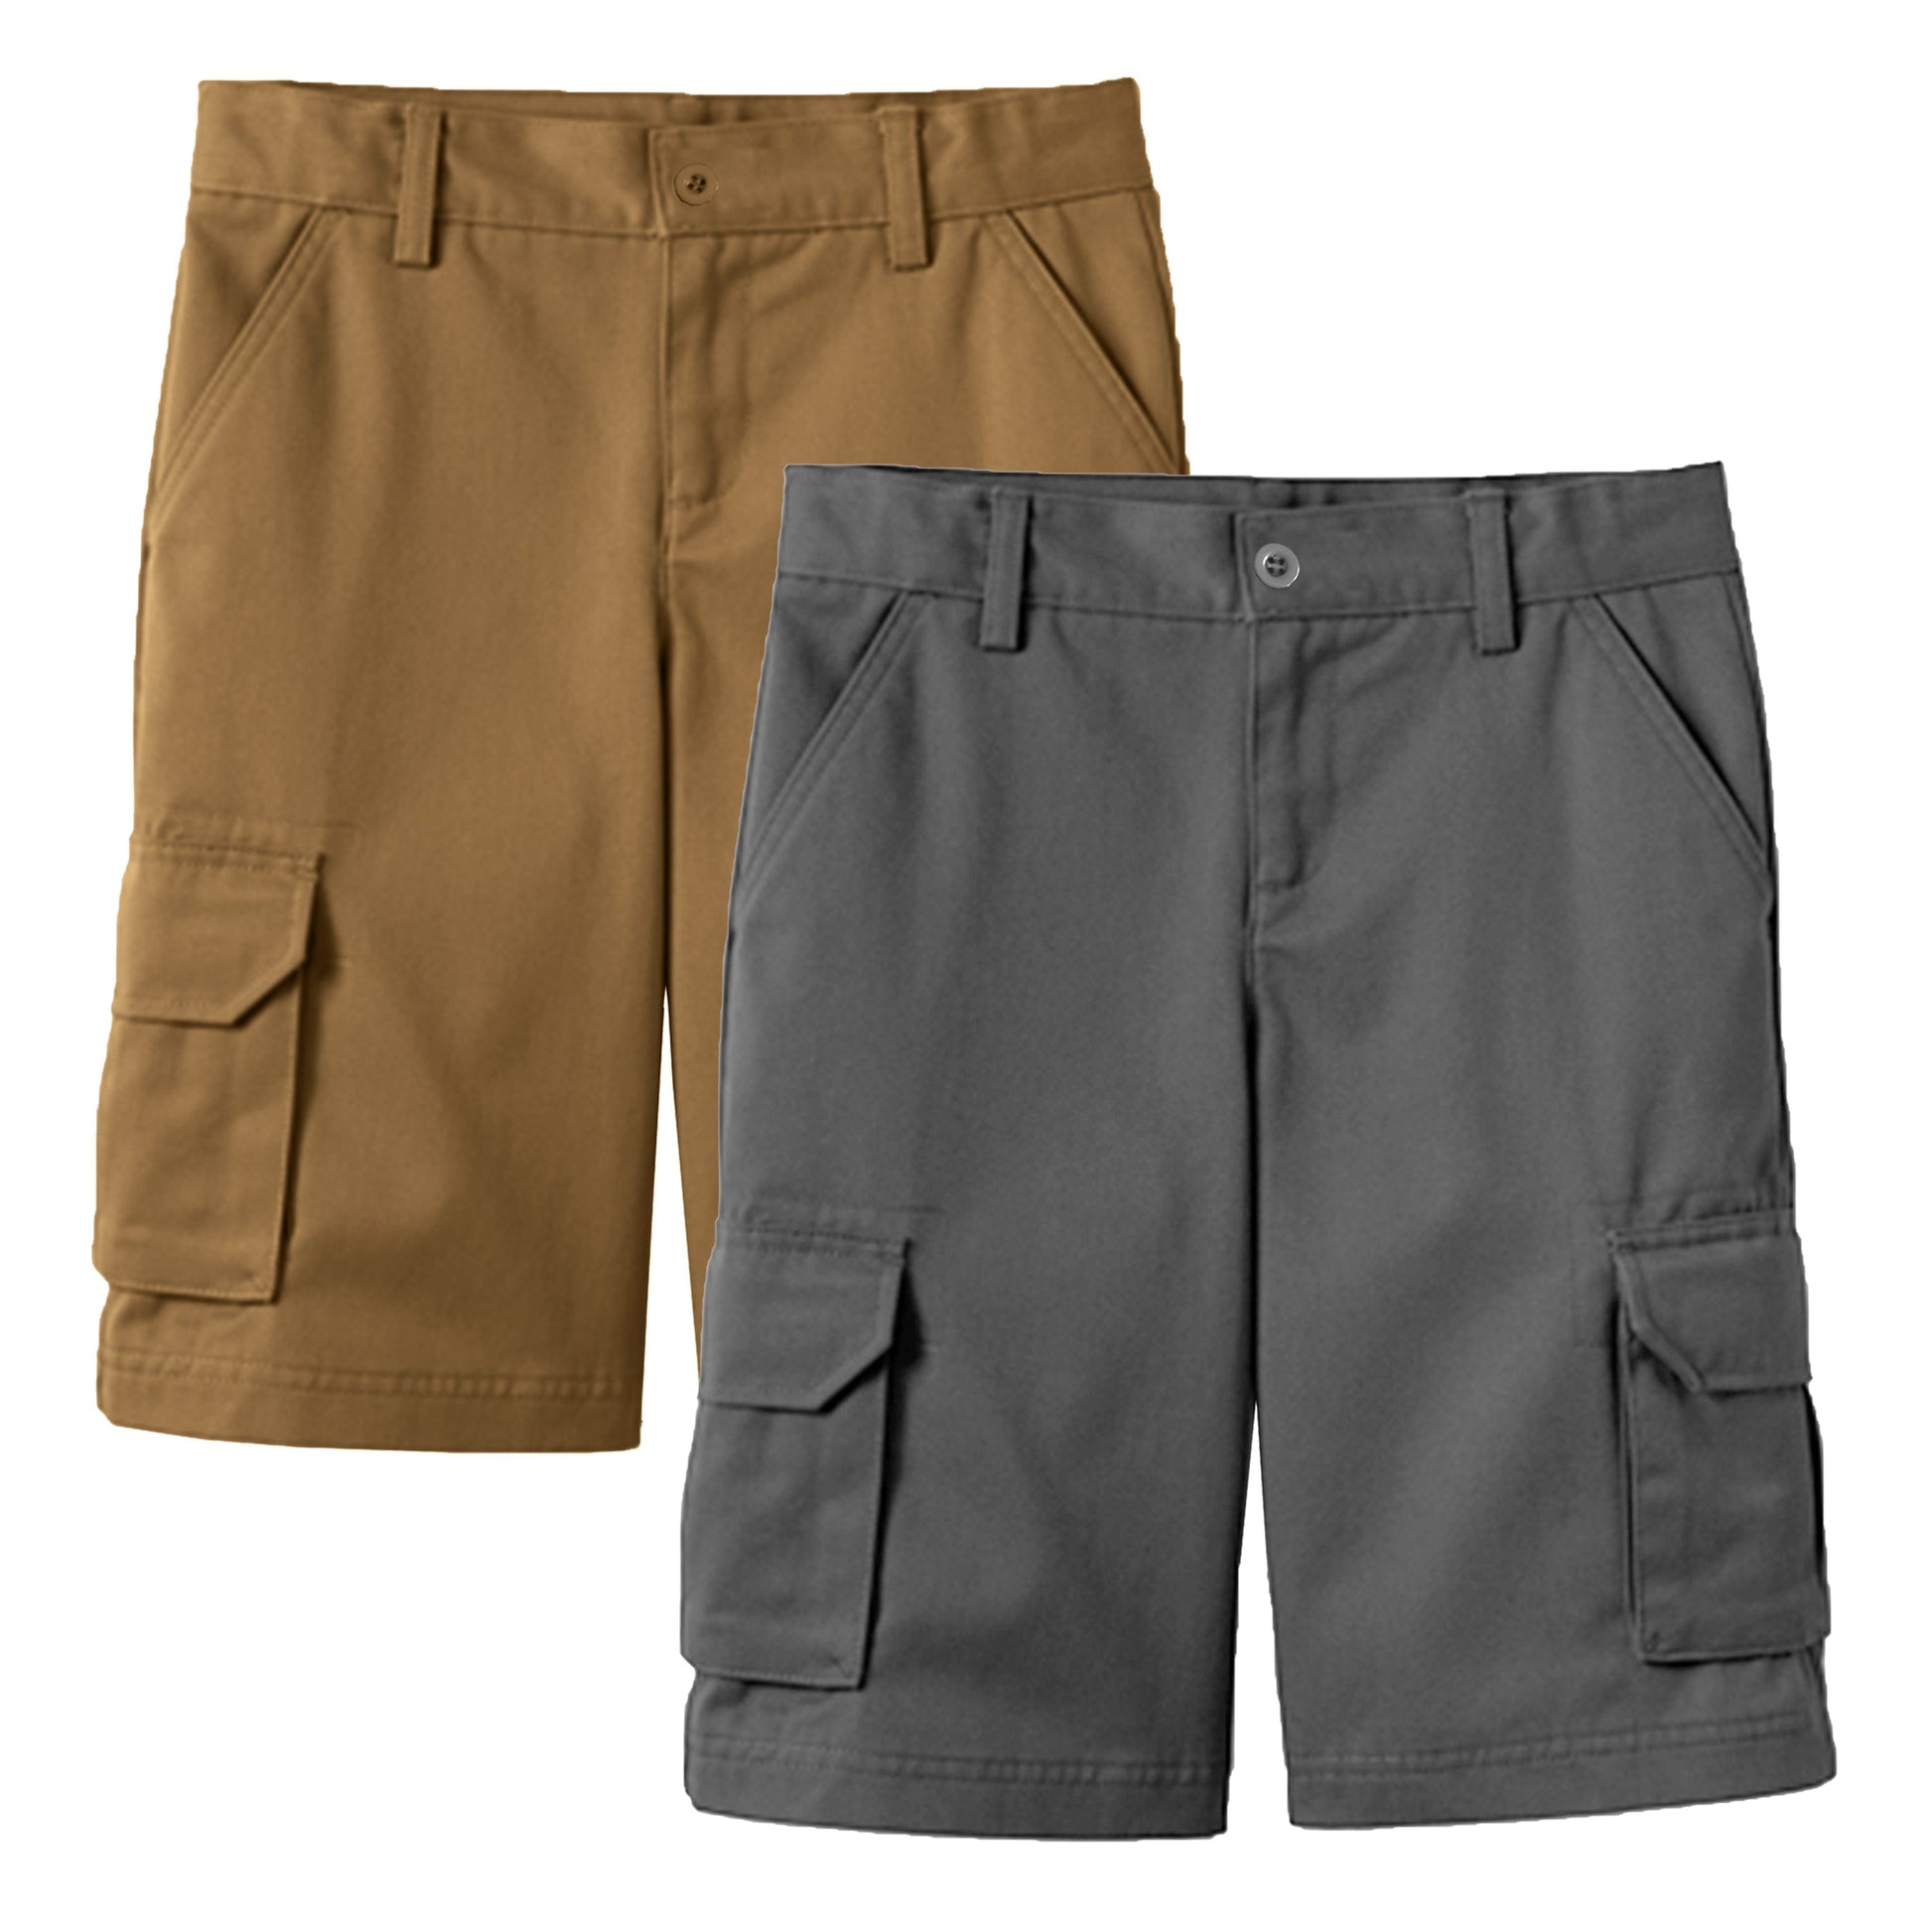 2-Pack Boy's Stretch Cotton Cargo Shorts (Sizes, 8-18) - GalaxybyHarvic